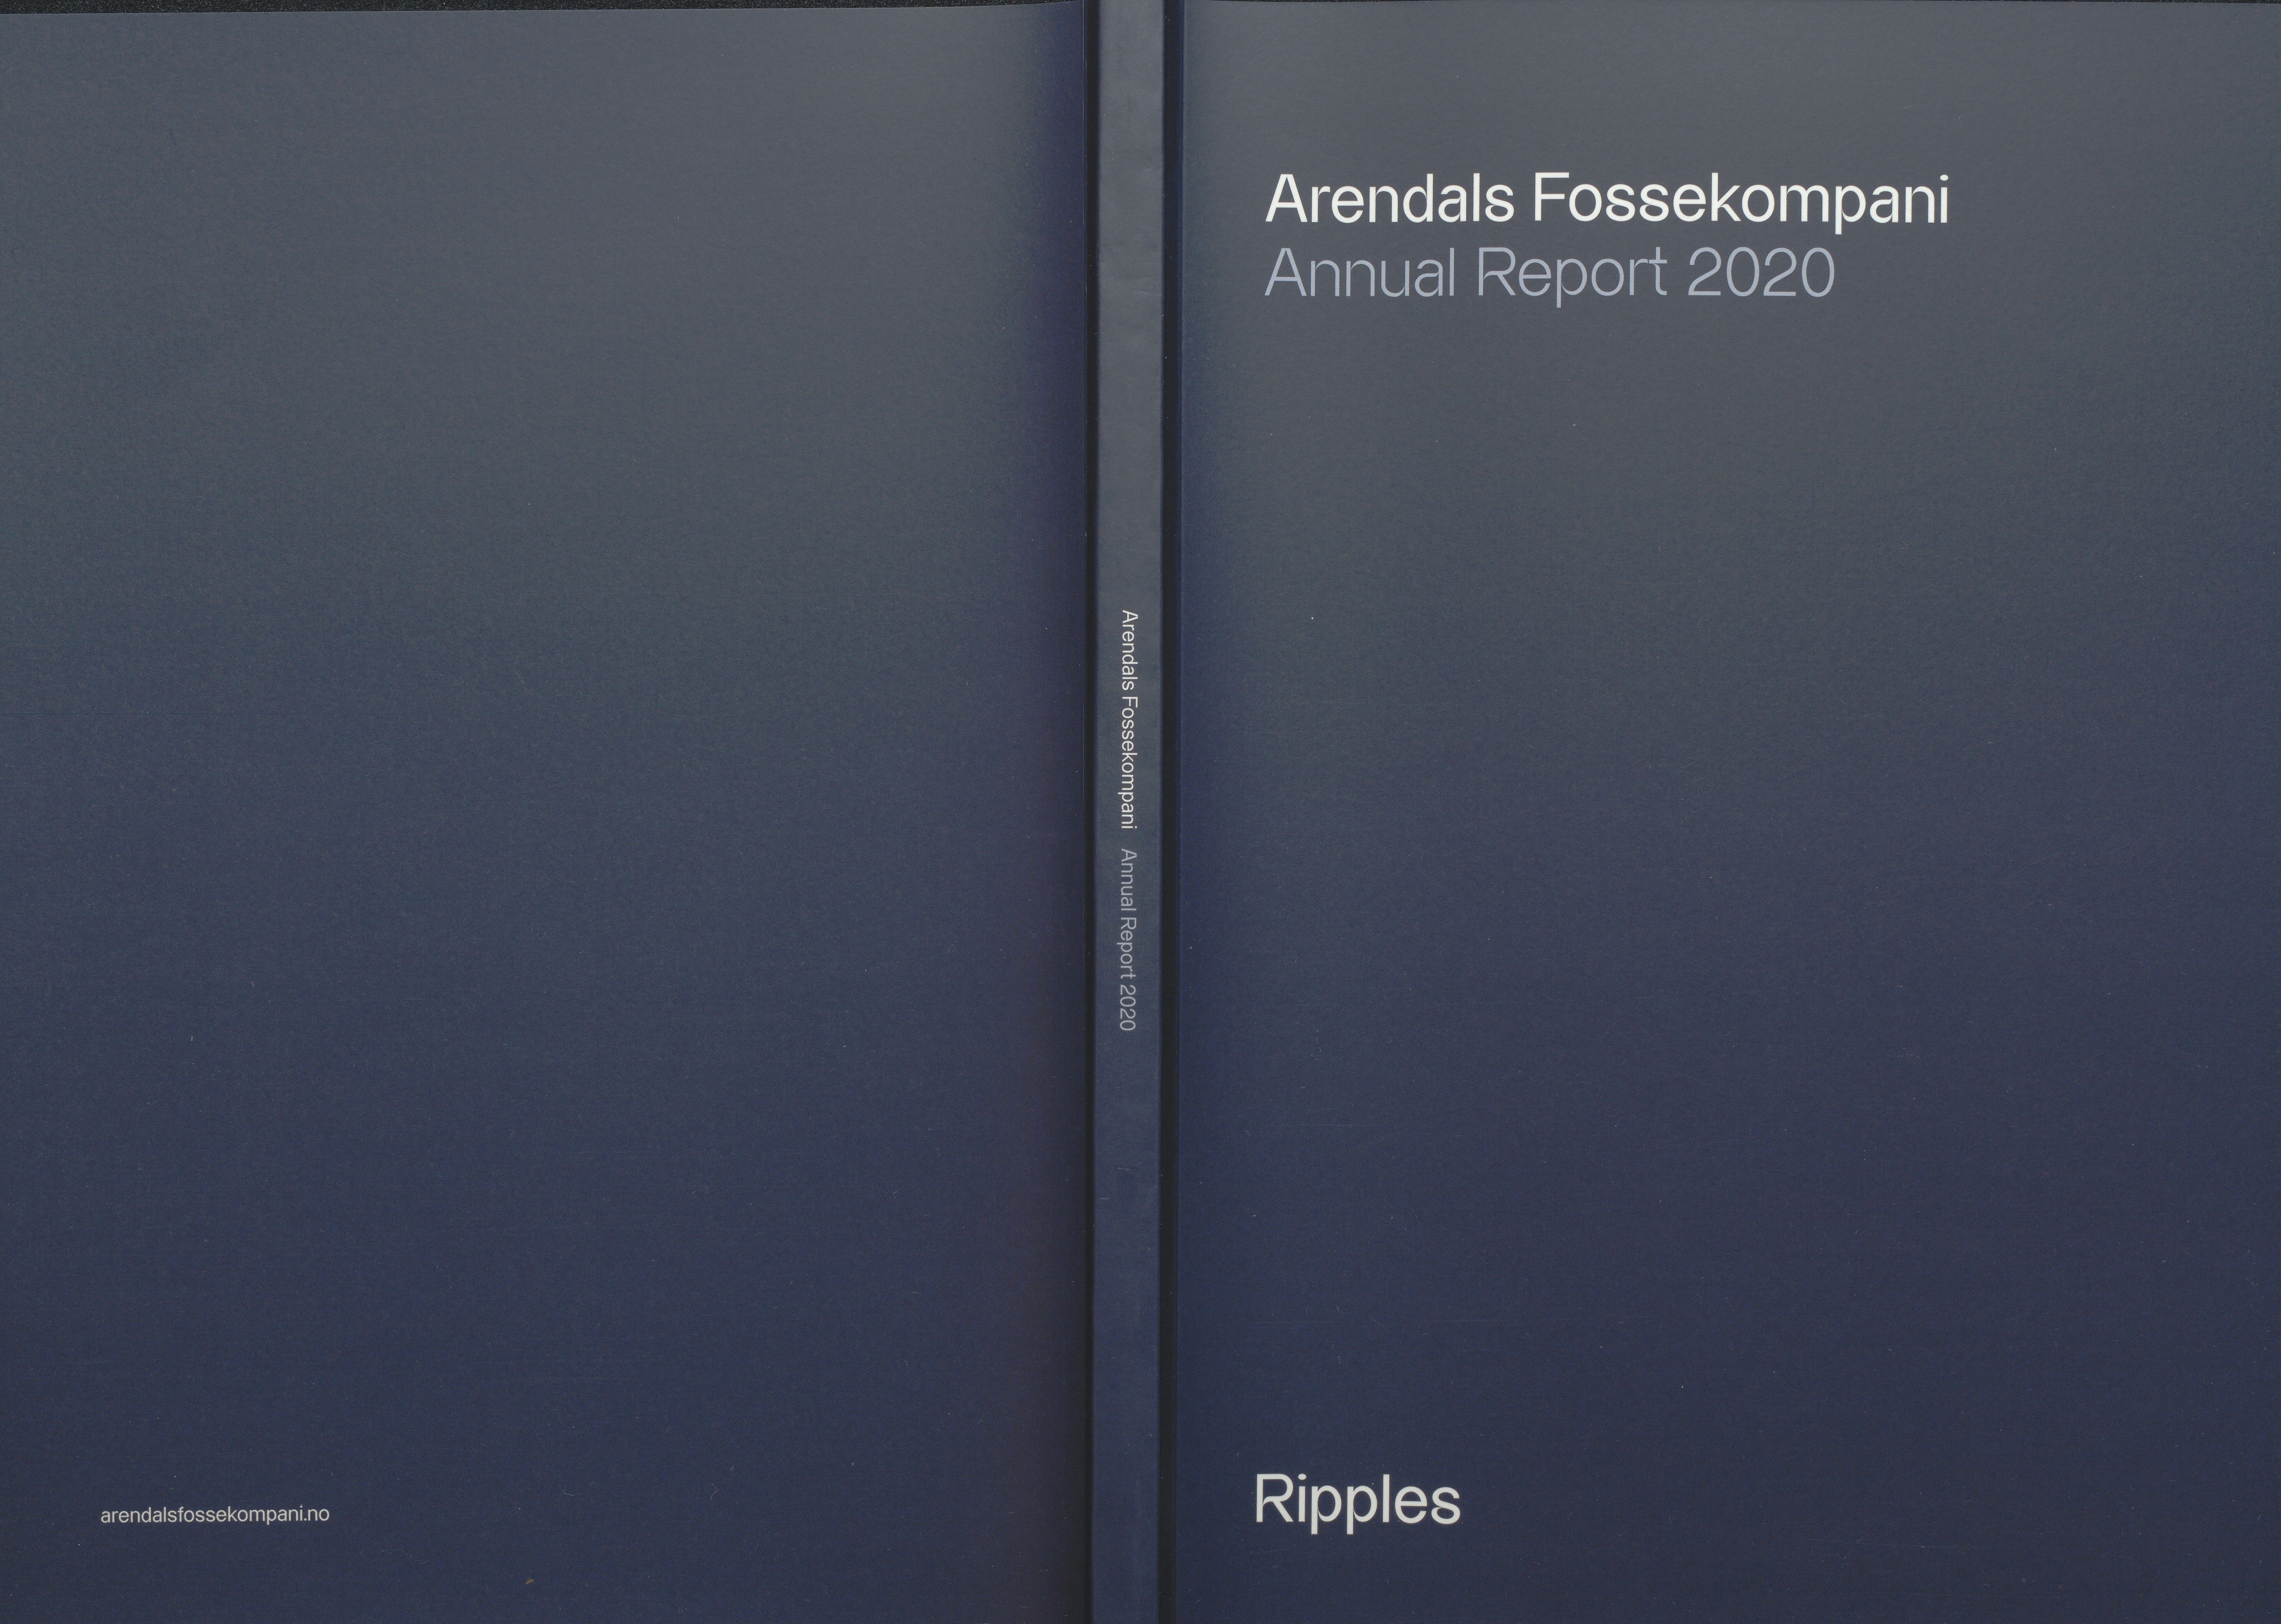 Arendals Fossekompani, AAKS/PA-2413/X/X01/L0003/0002: Årsrapporter 2016 - 2020 / Reports 2020, 2020, p. 1